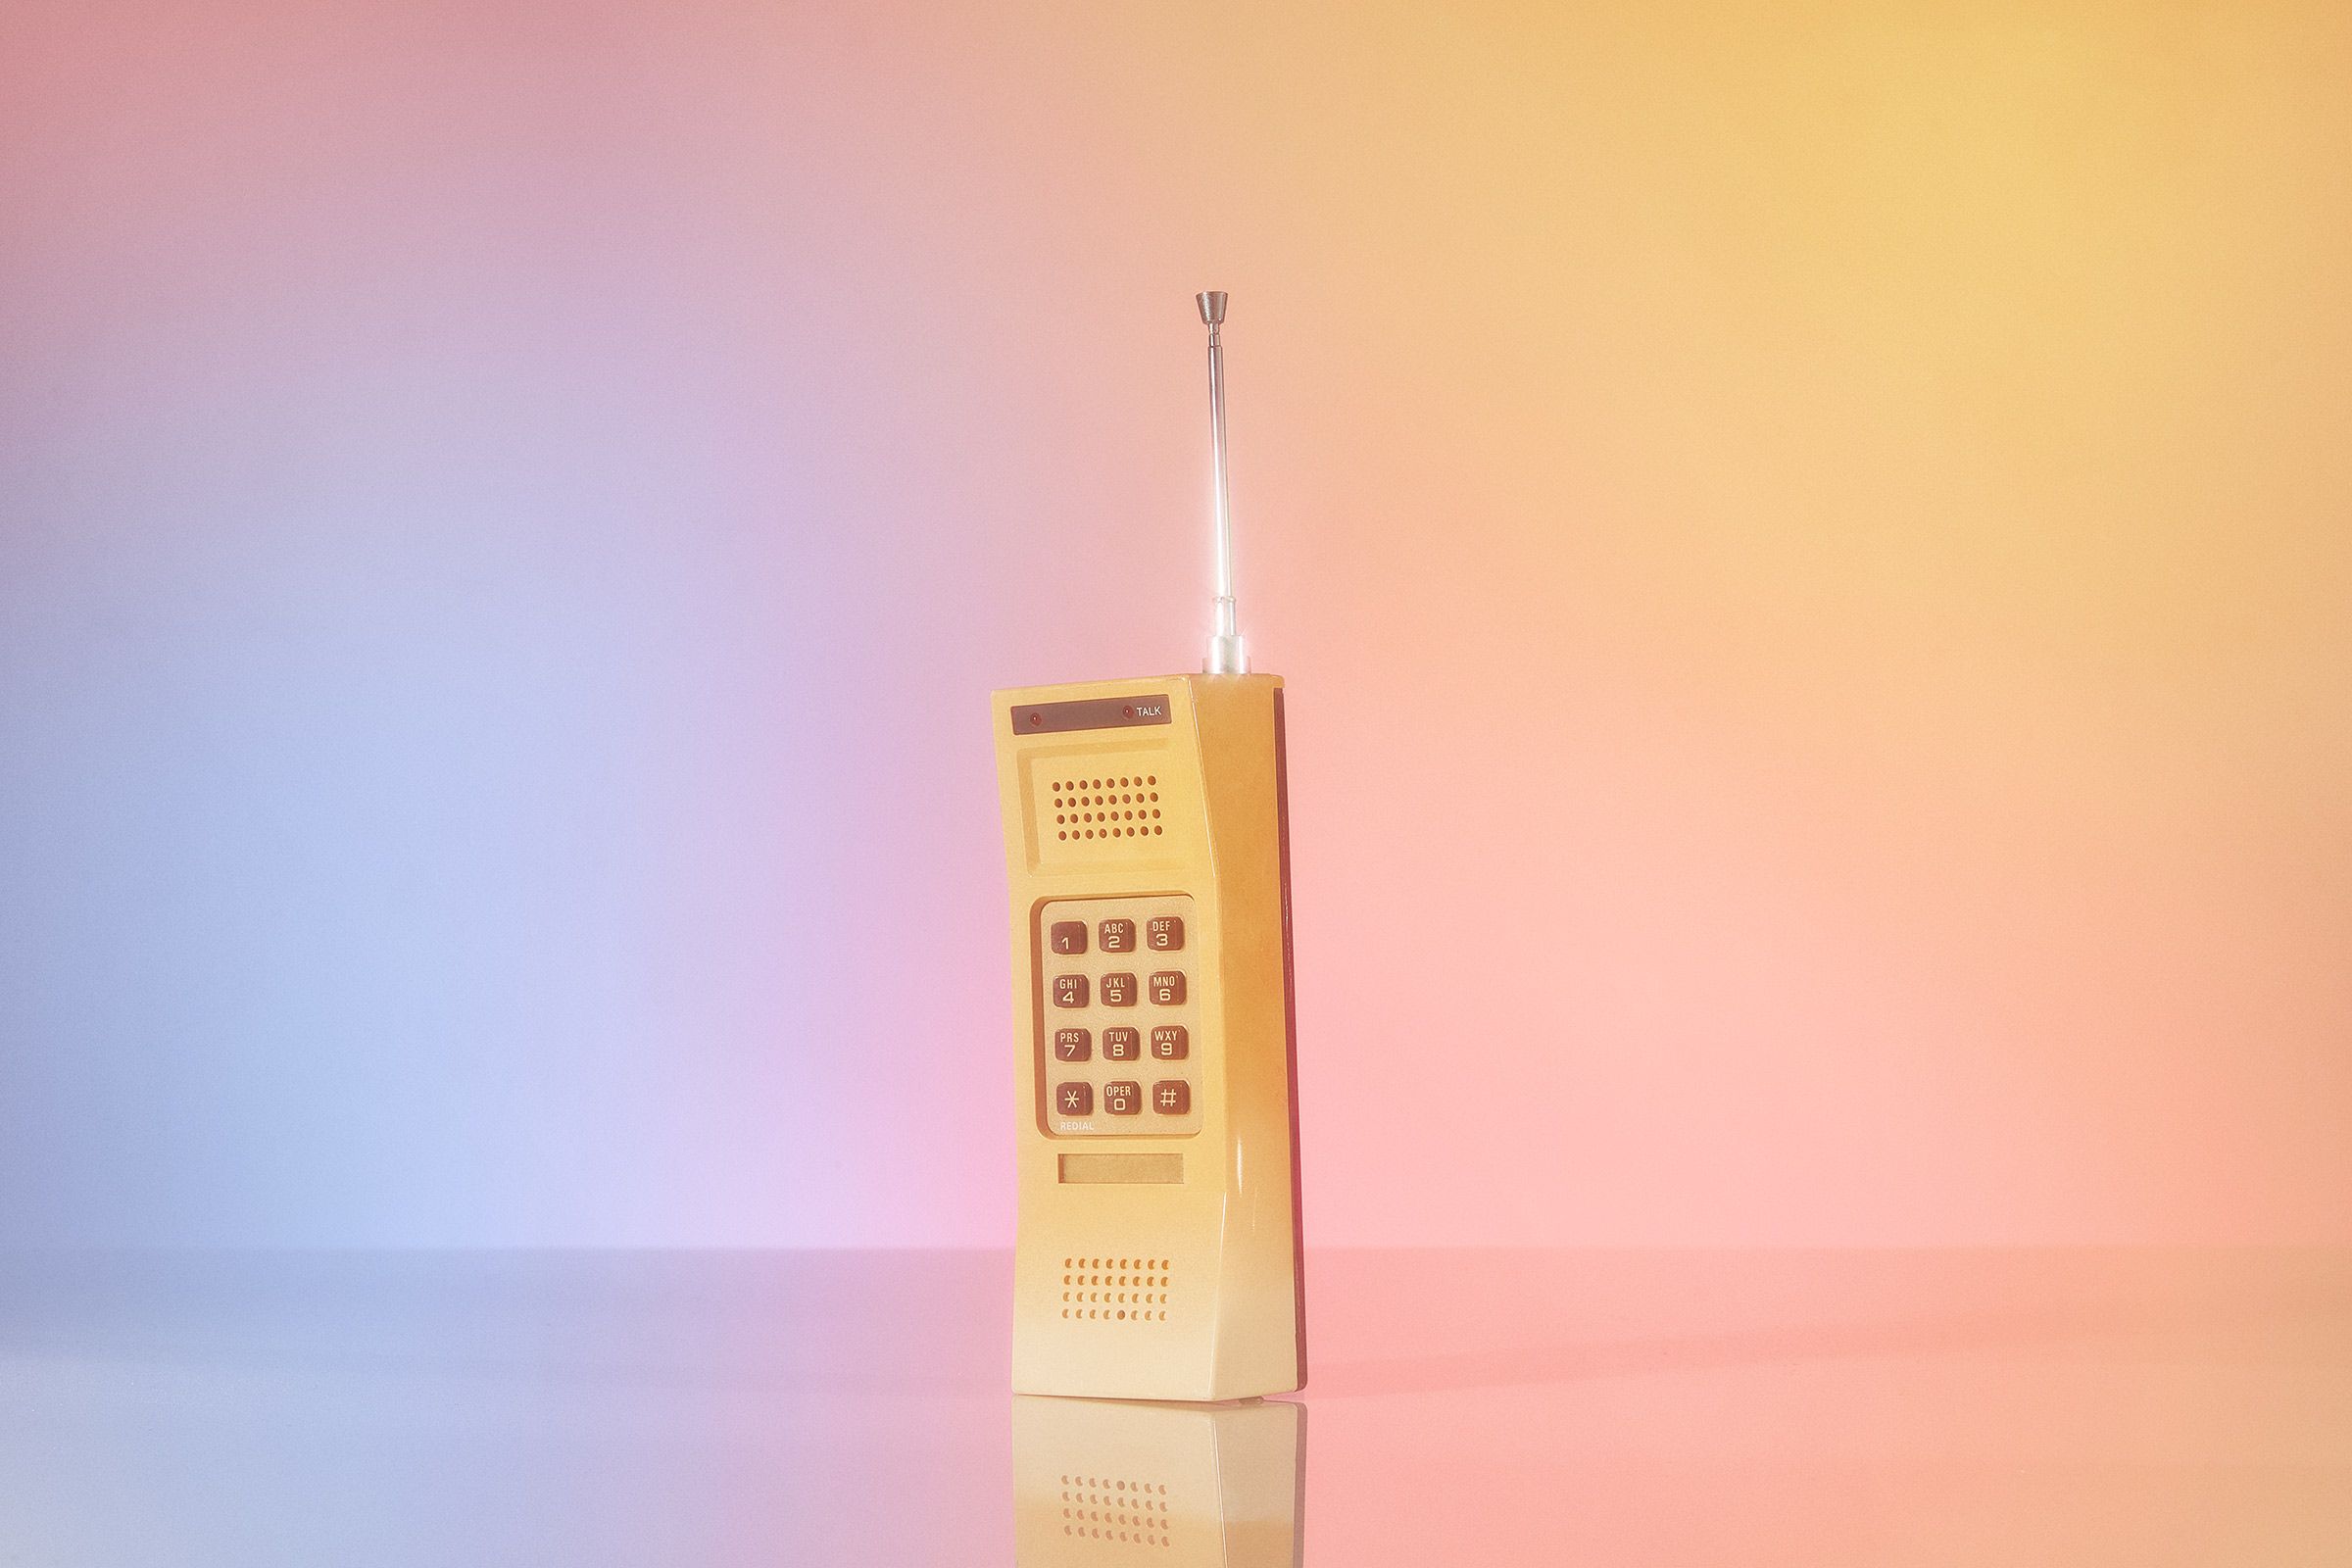 A vintage phone on a pink gradient background